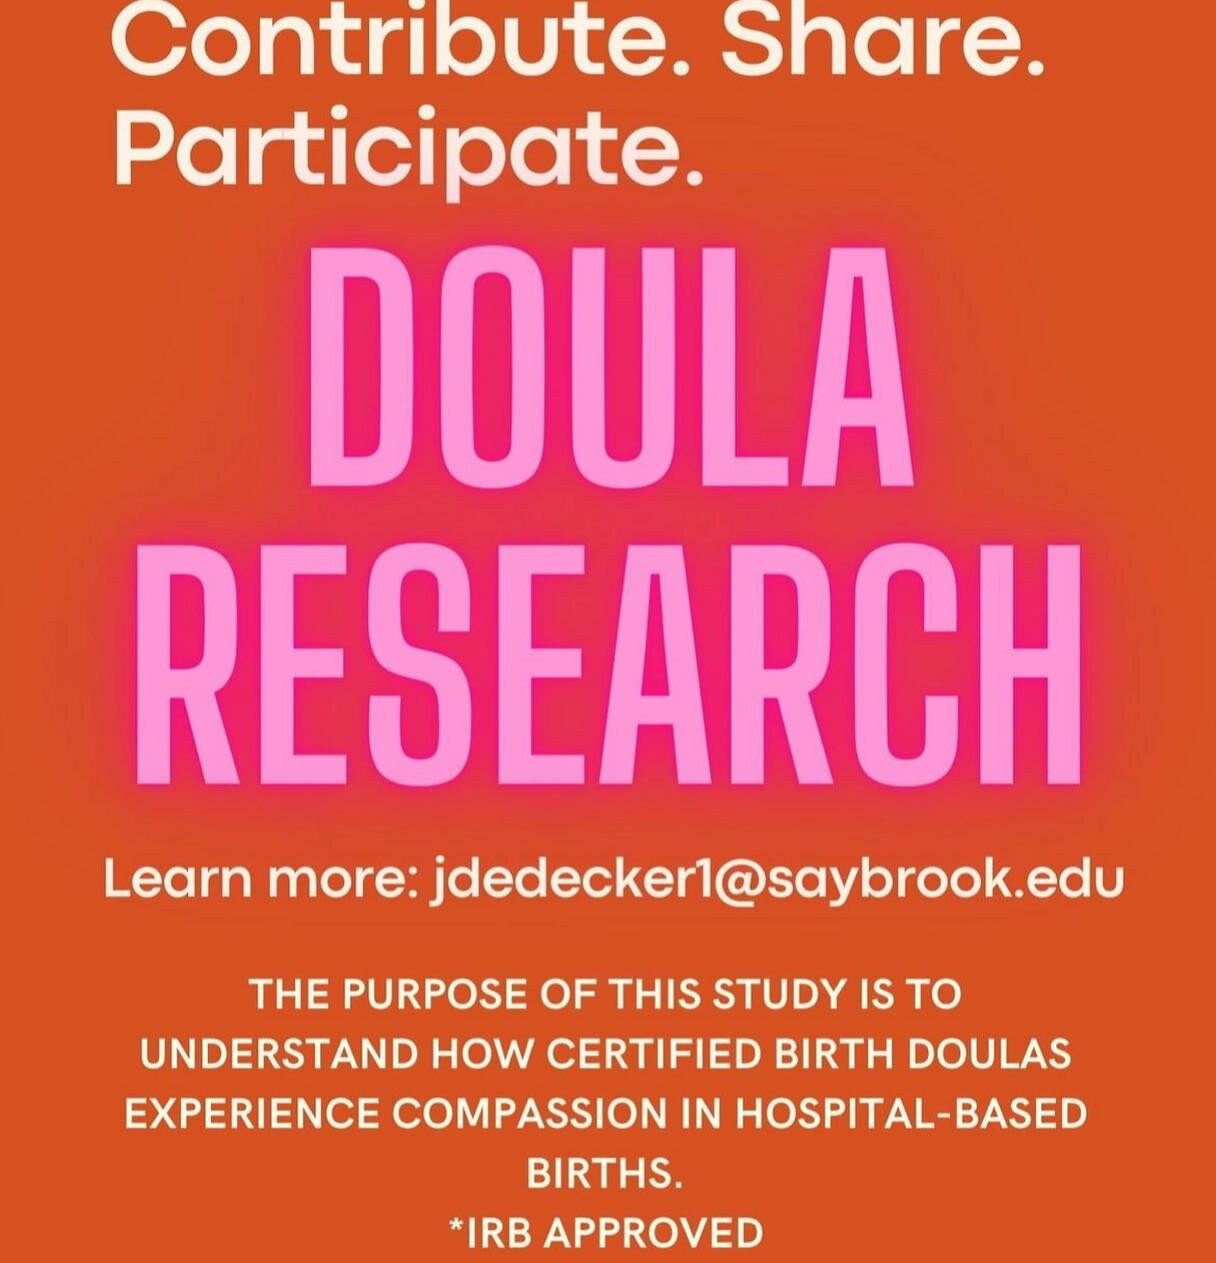 📢 Calling all certified birth doulas! 📢 #doula #doulas #doulalife #birth #birthdoula #childbirthsupport #doulaservices #hospitalbirth